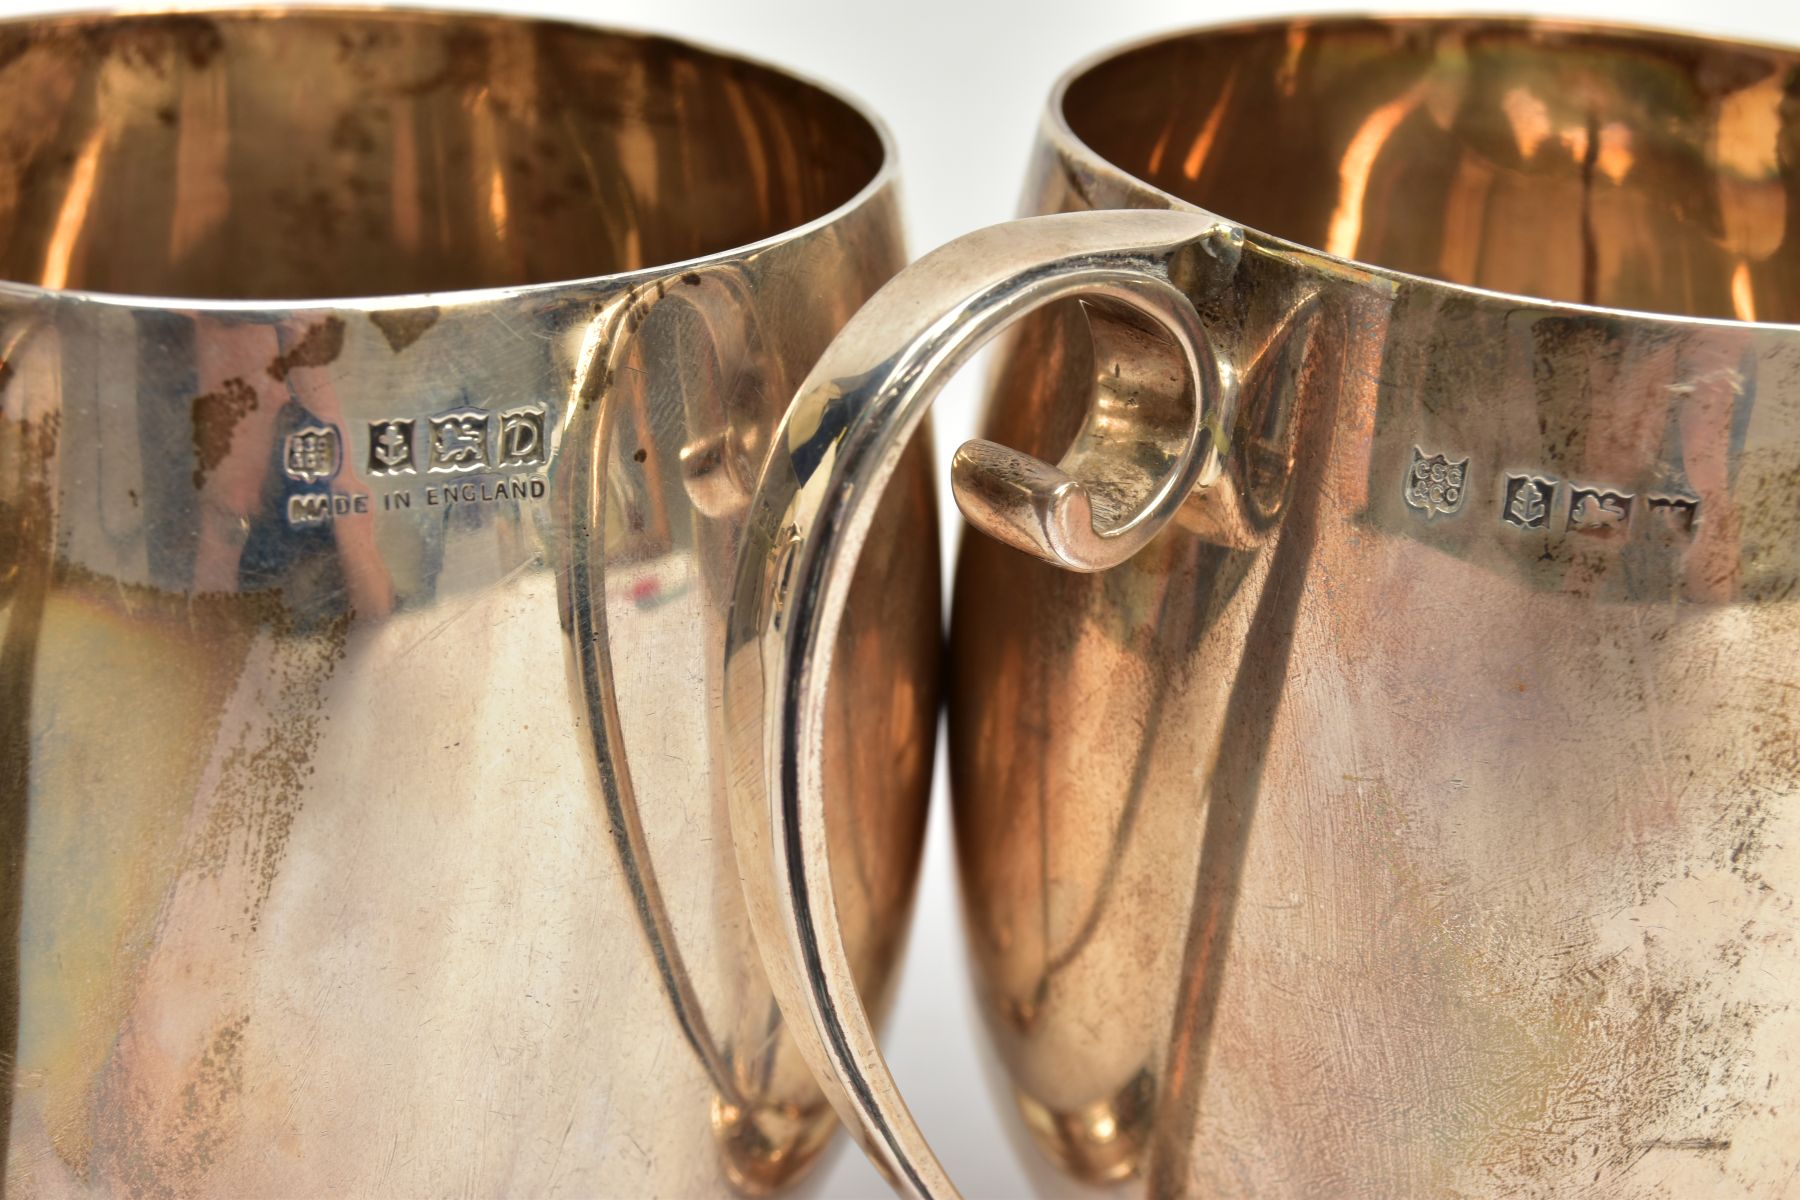 A PAIR OF SILVER CUPS, each of a plain polished design, personal engraving reads 'M.C & M.T.G.S - Bild 4 aus 6